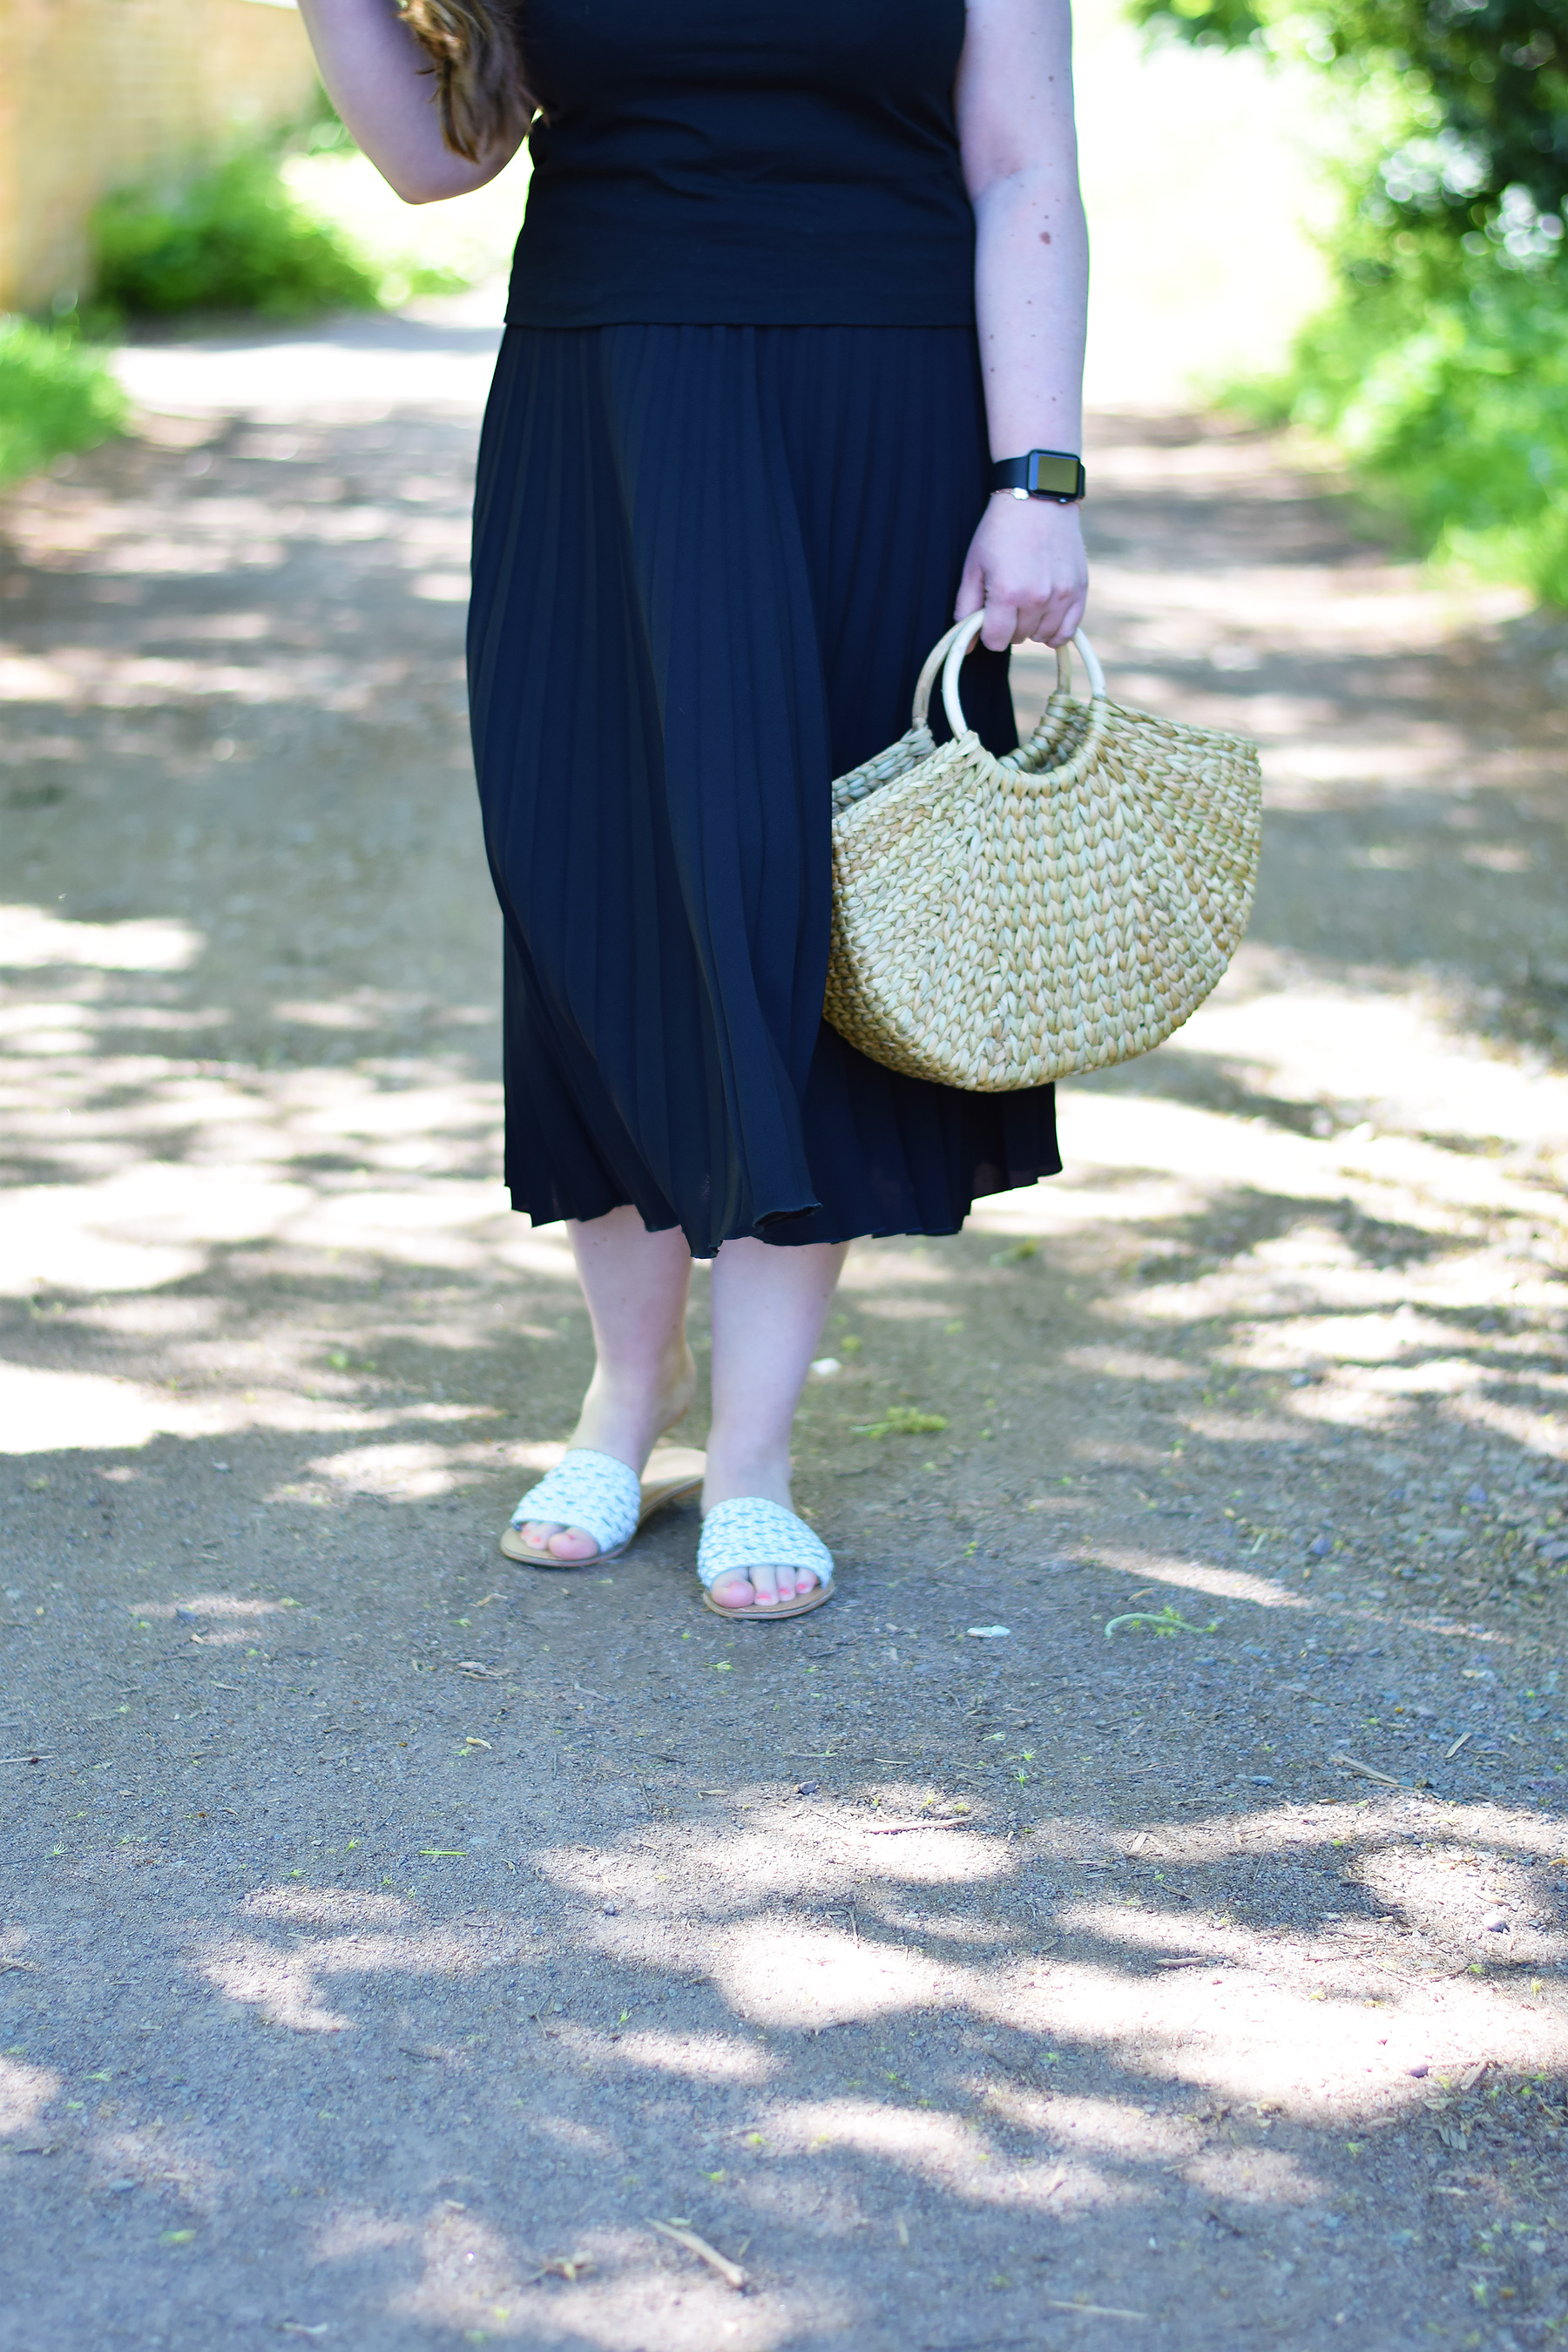 Zara straw bag with rounded handles and black pleated skirt